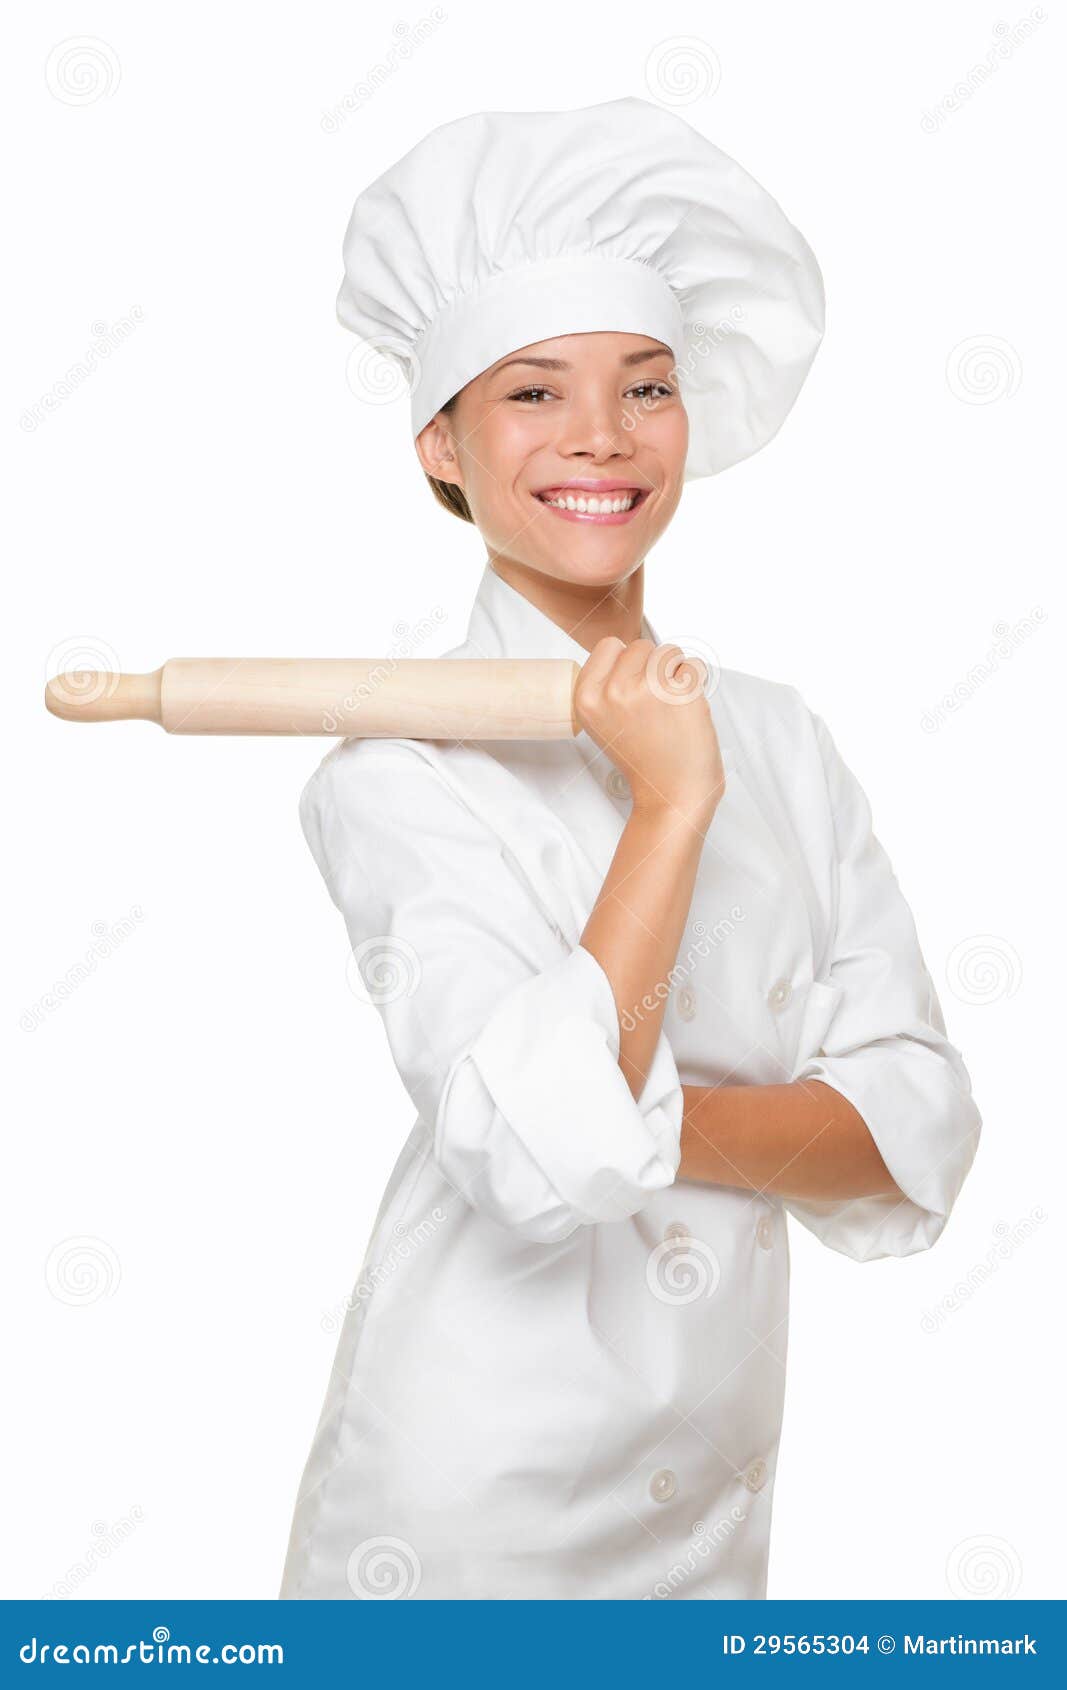 Baker Woman Smiling Proud with Baking Rolling Pin Stock Photo - Image ...